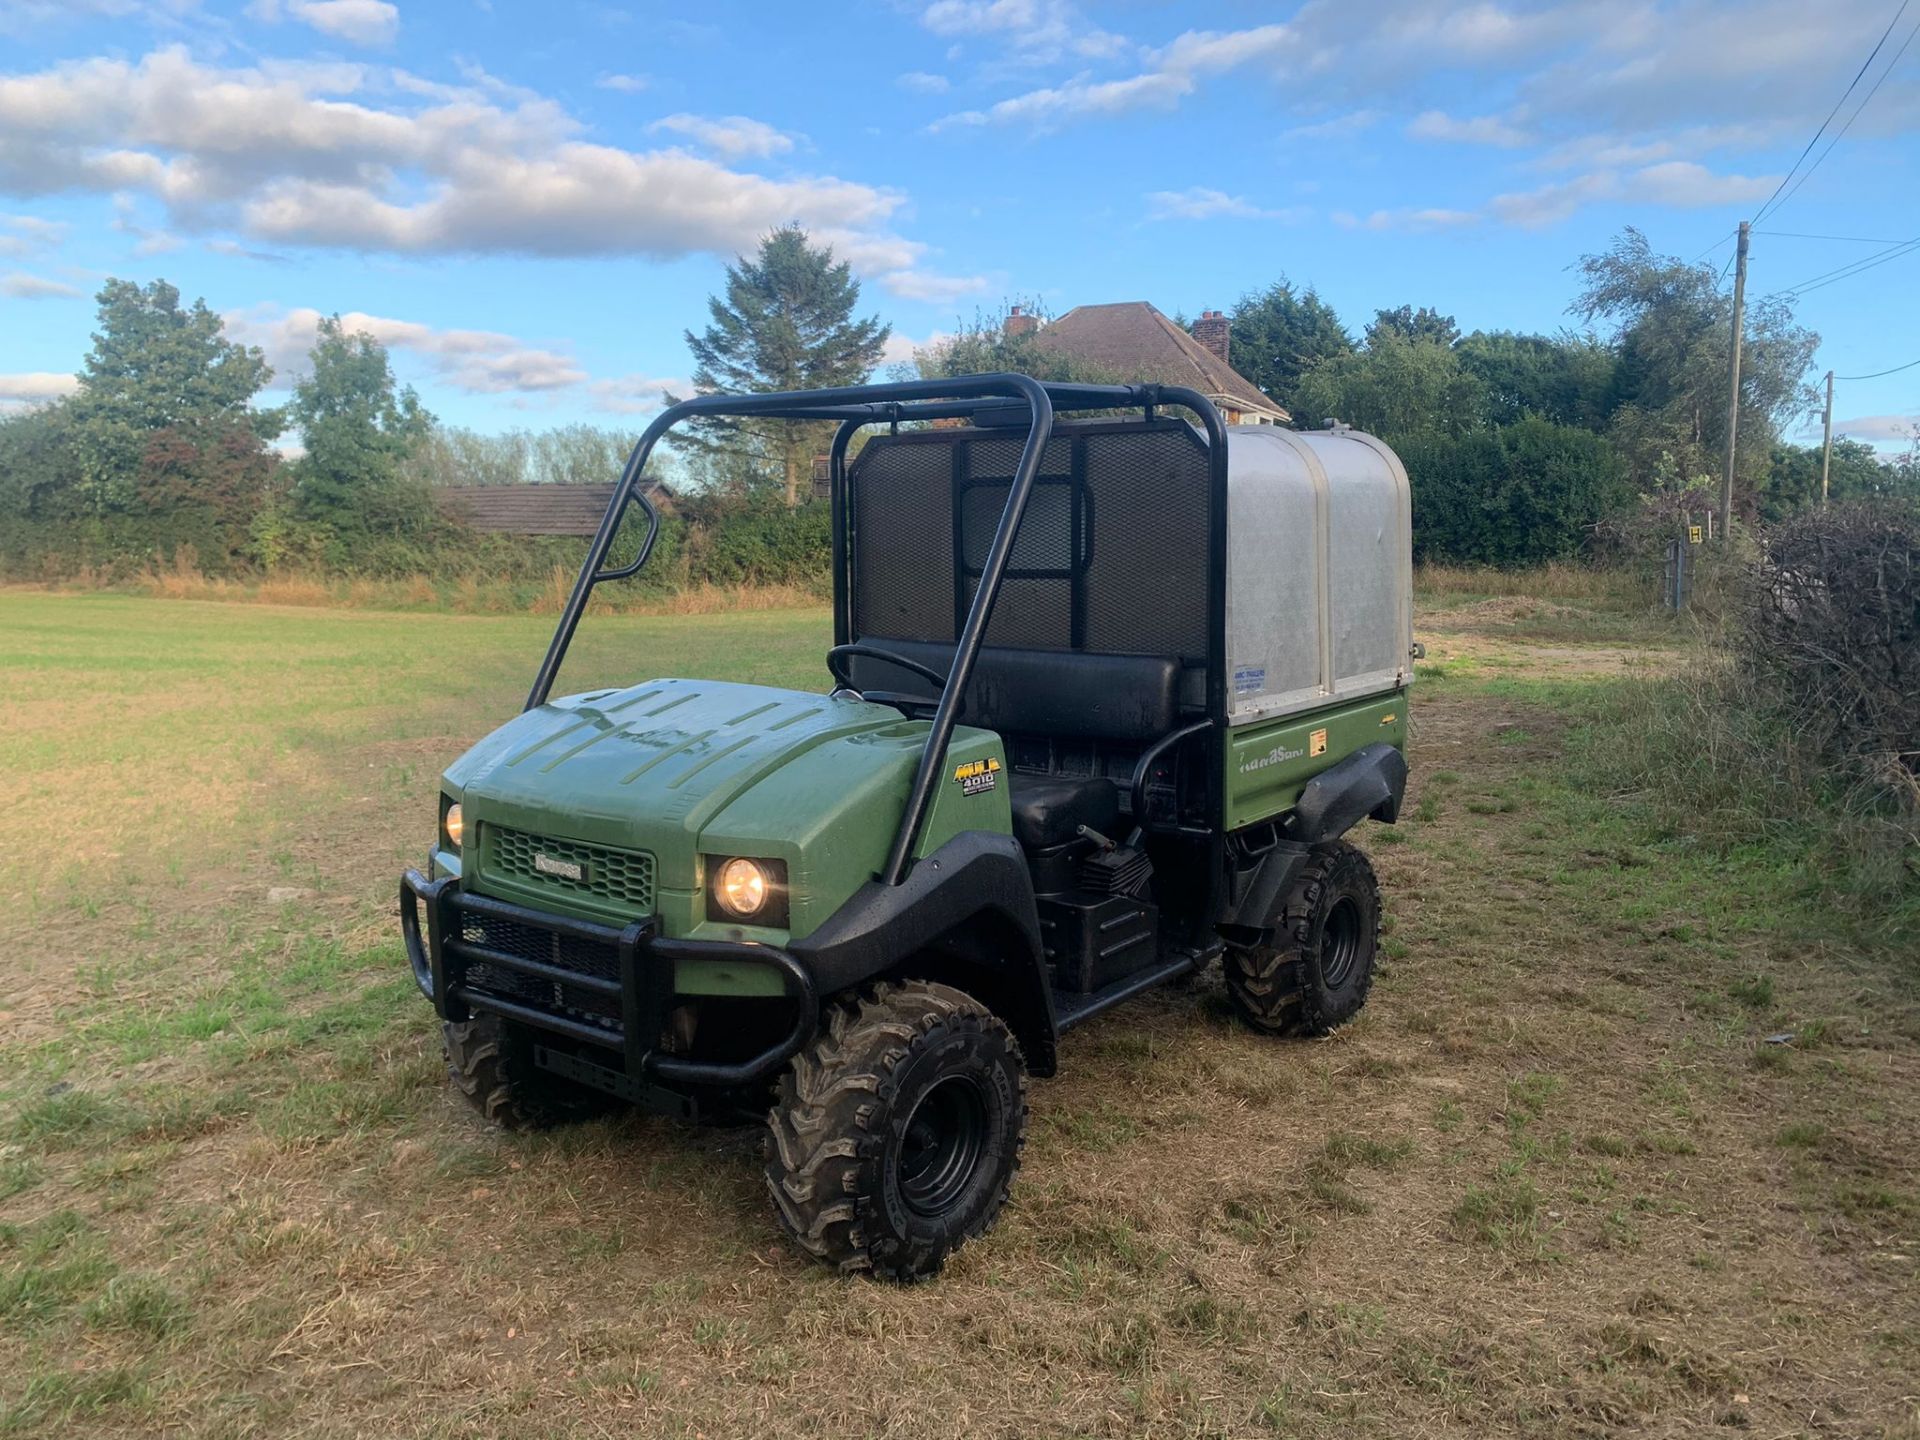 2013 KAWASAKI MULE 4010 4WD BUGGI, RUNS AND DRIVES, SHOWING A LOW 3500 HOURS *PLUS VAT* - Image 2 of 13